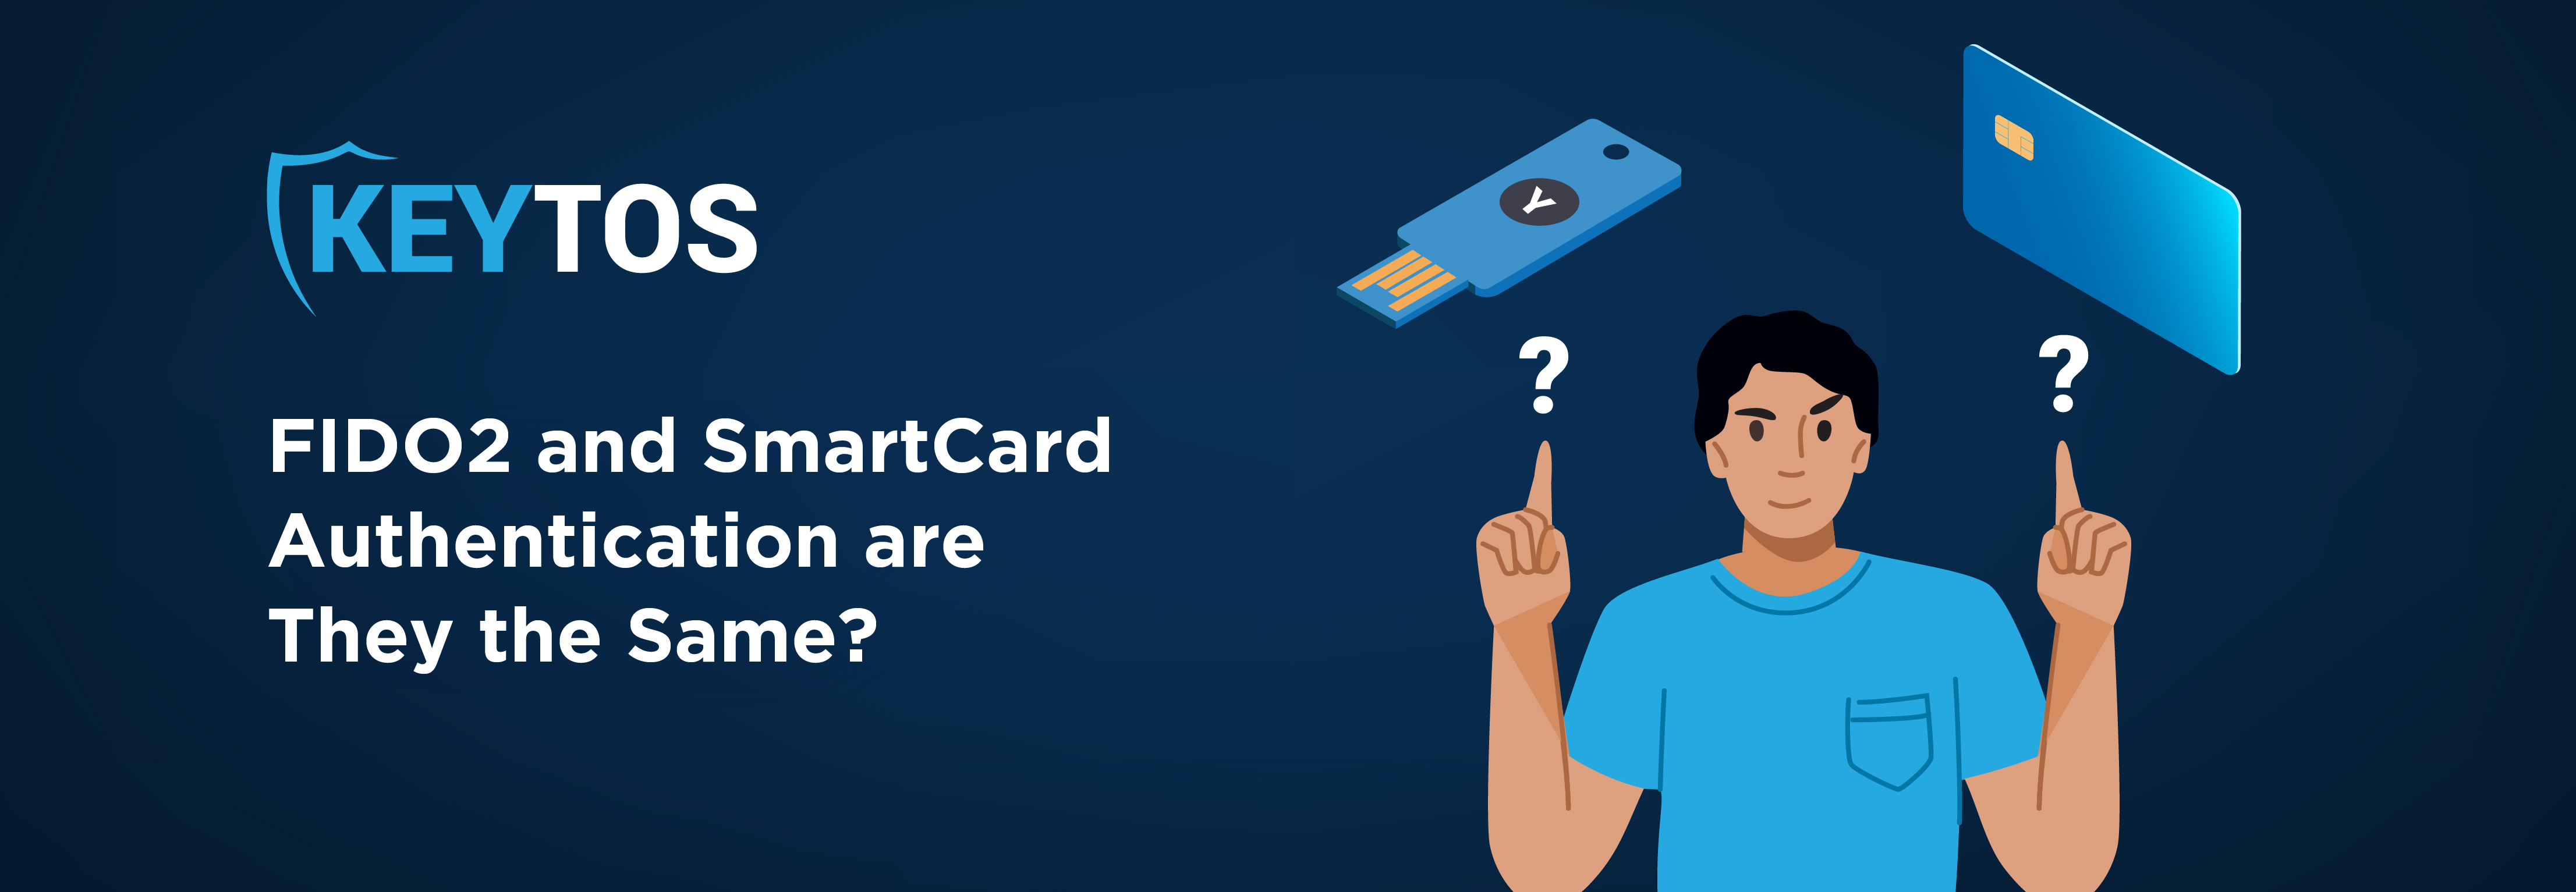 What's the difference between FIDO2 and Smartcard authentication?